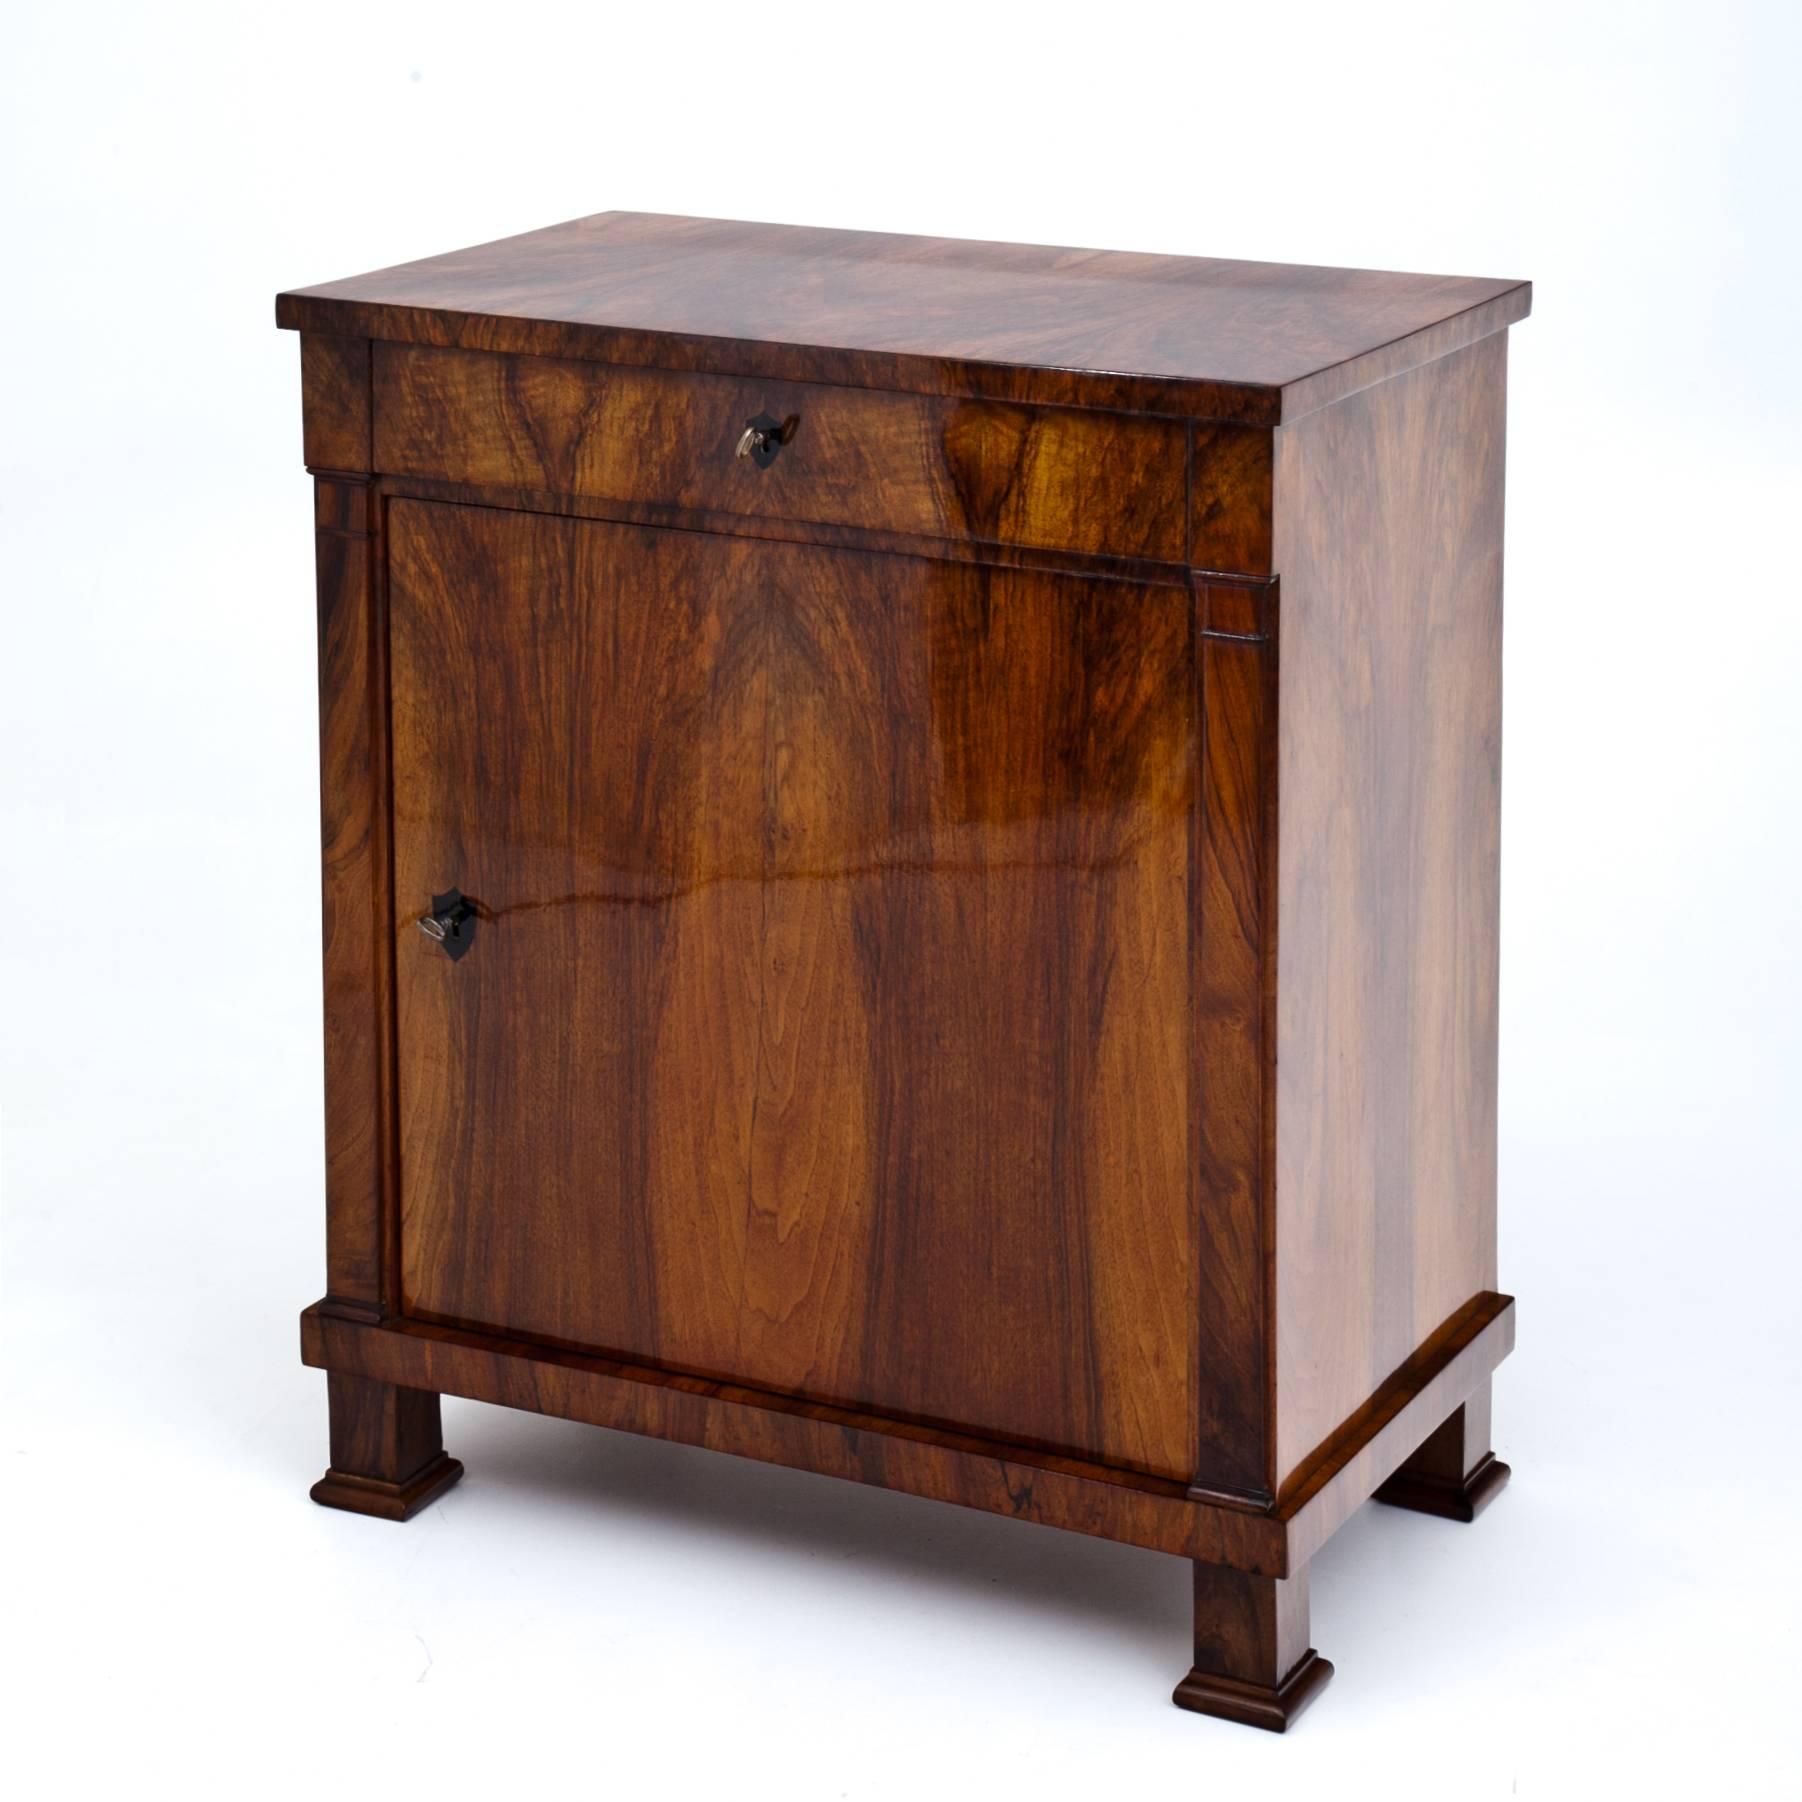 Small Biedermeier cabinet on square feet with small bases and one top drawer. The streamlined body shows a beautiful walnut veneer. A pair of pilasters frame the door and the locks are decorated with ebonized escutcheons.